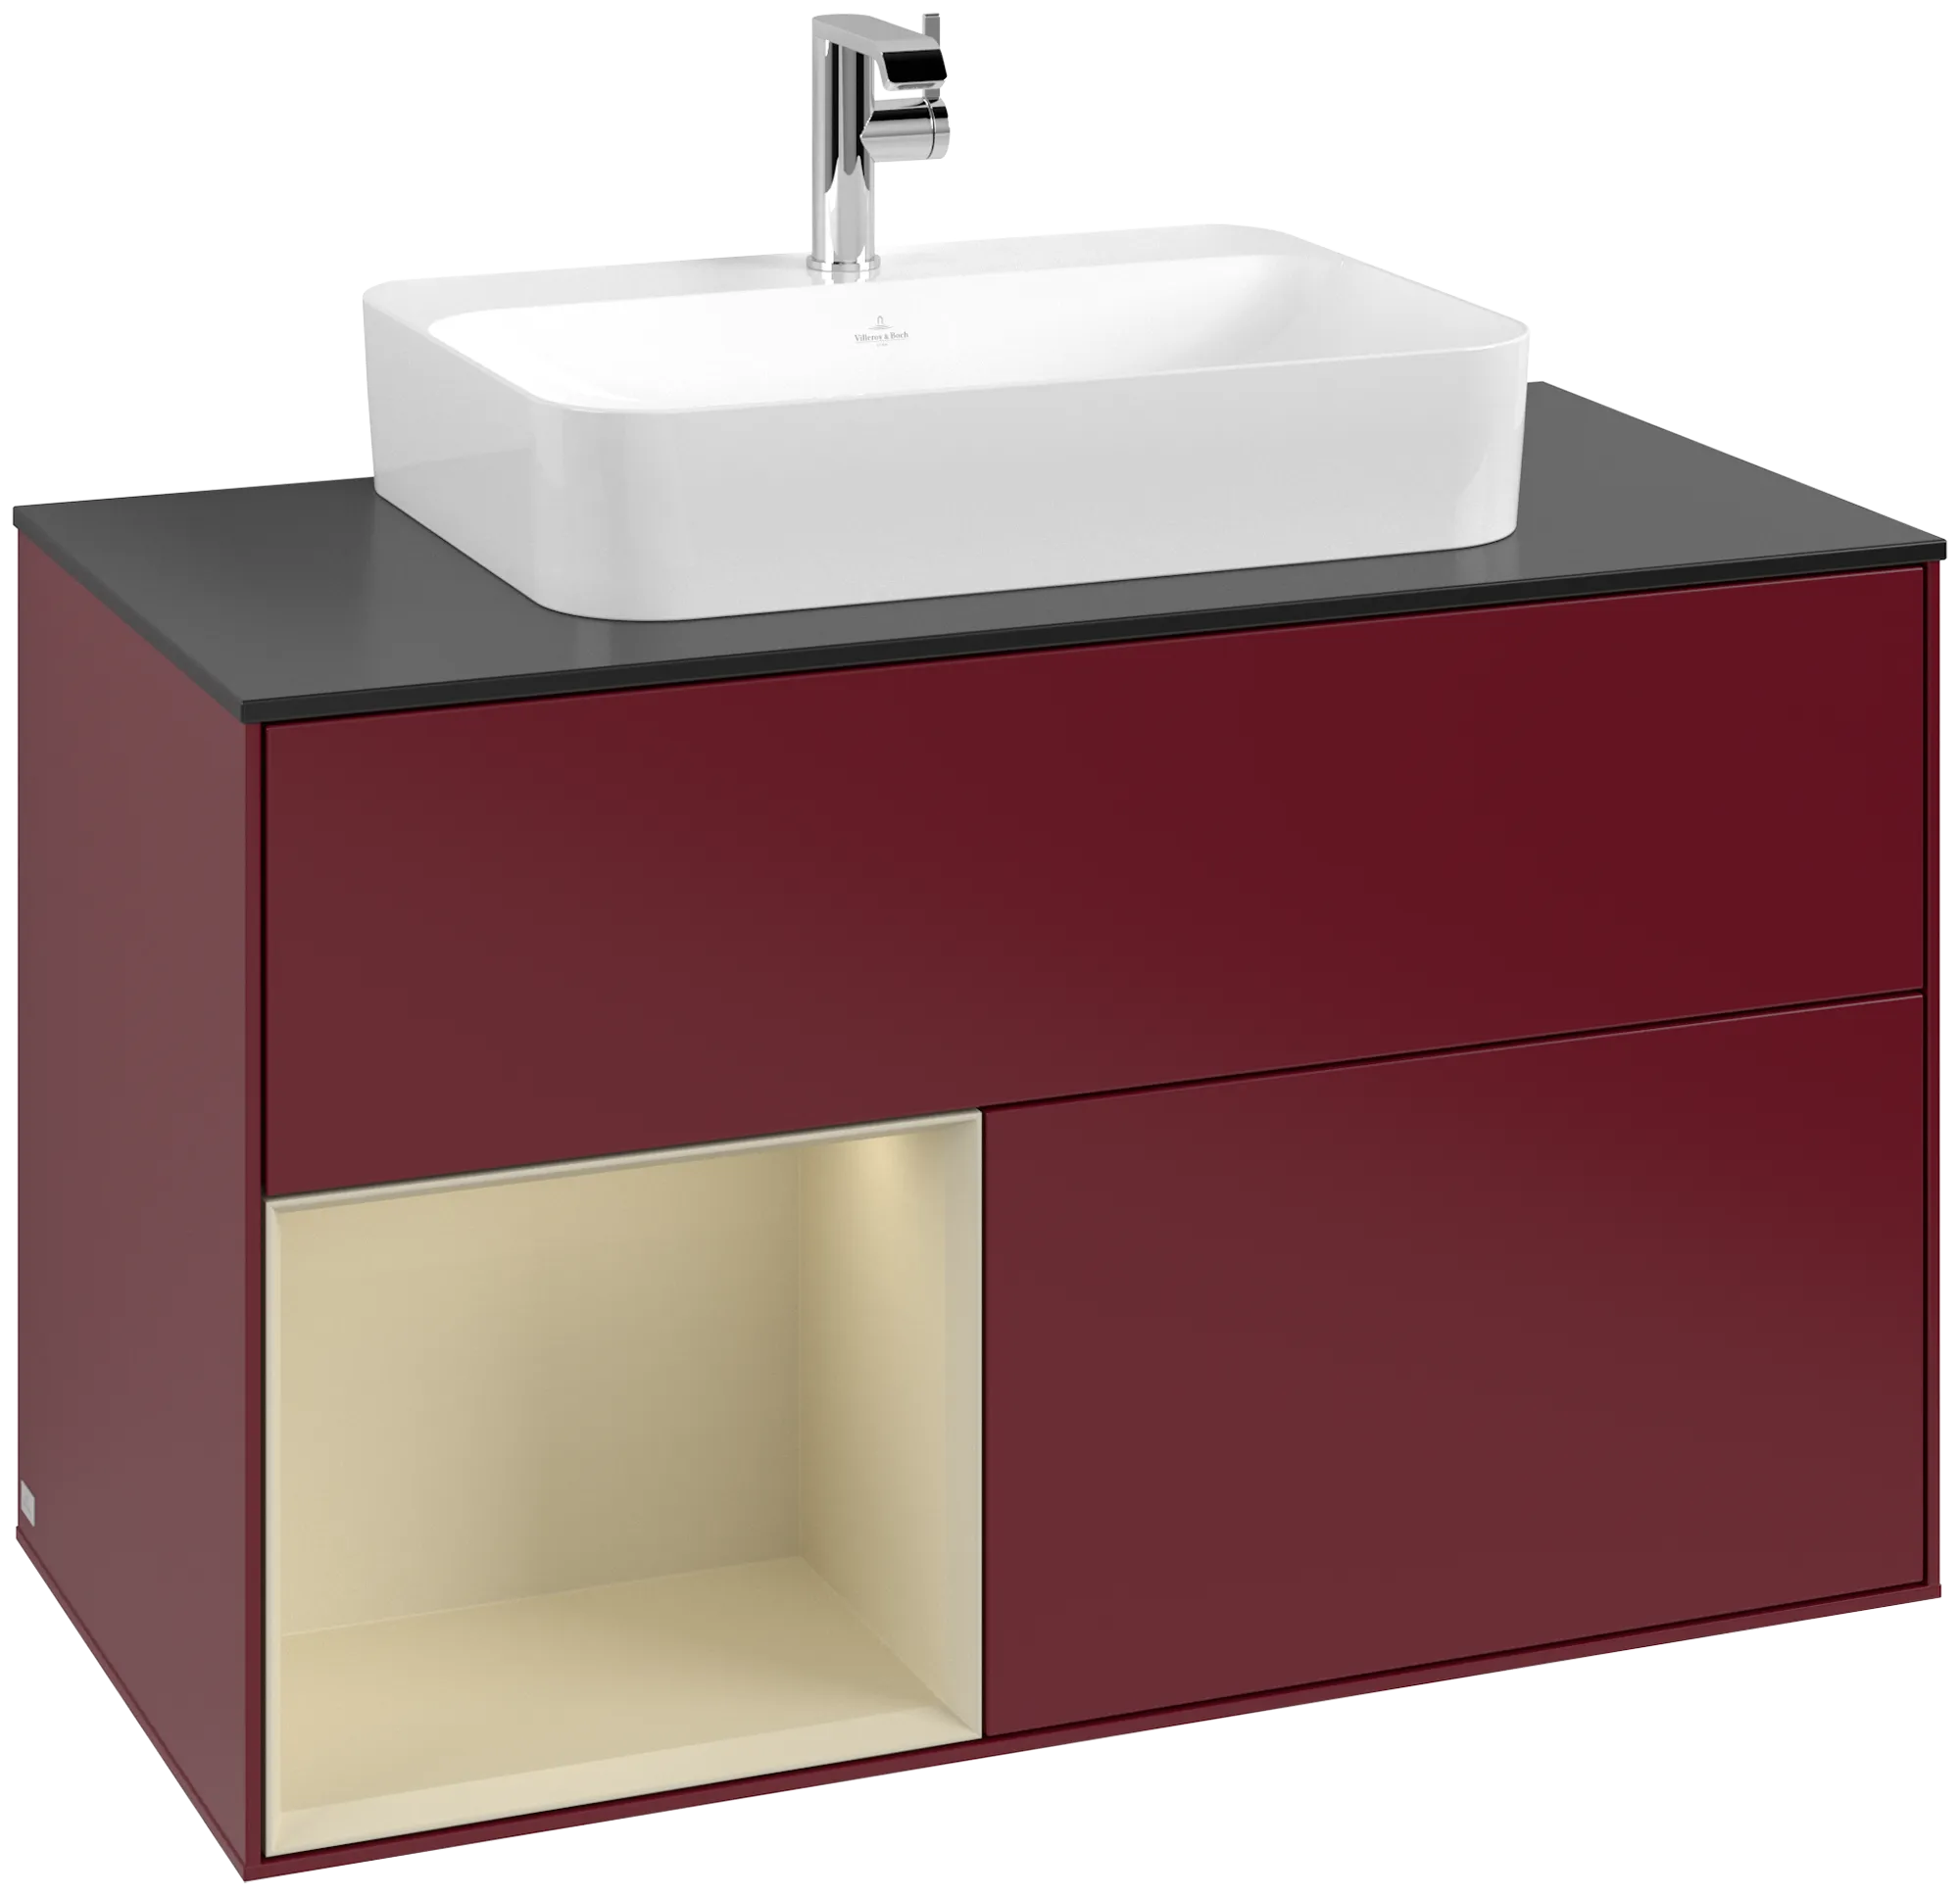 Picture of VILLEROY BOCH Finion Vanity unit, with lighting, 2 pull-out compartments, 1000 x 603 x 501 mm, Peony Matt Lacquer / Silk Grey Matt Lacquer / Glass Black Matt #G362HJHB